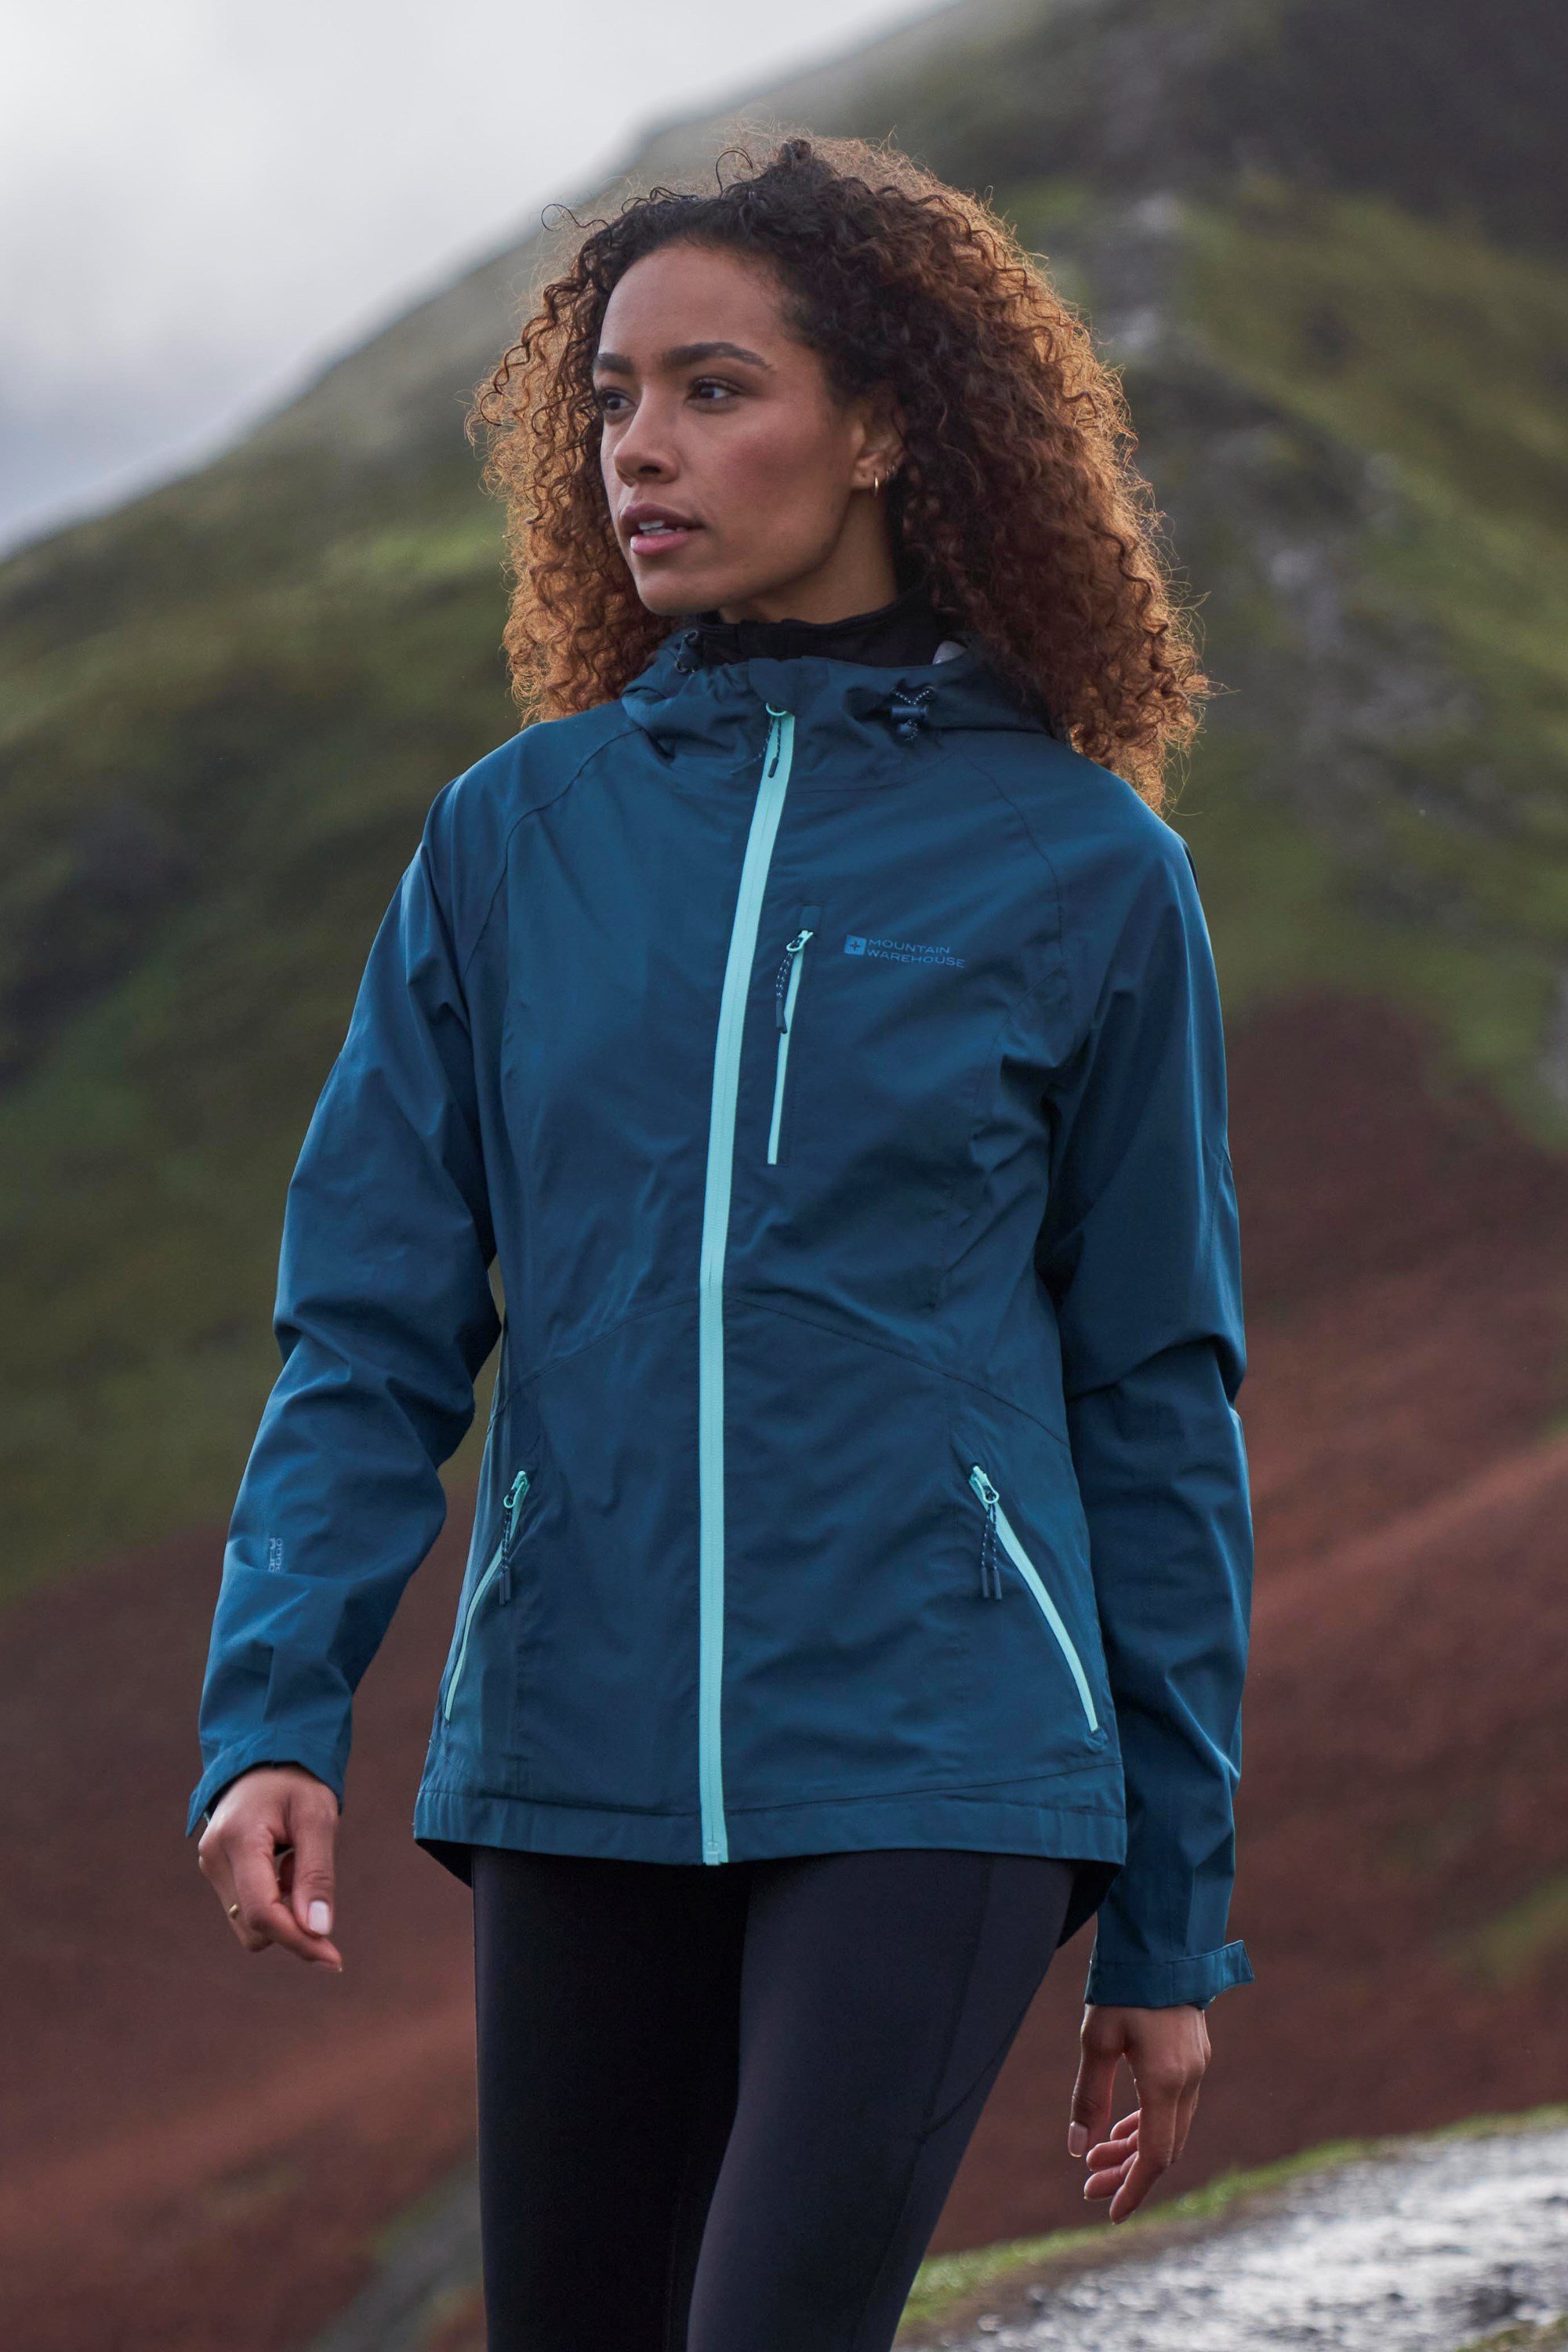 https://img.cdn.mountainwarehouse.com/product/034539/034539_dte_2.5_layer_l_weight_extreme_wms_ecom_lifestyle_waterproof_jacket_wms_ecom_lifestyle_ss22_01.jpg